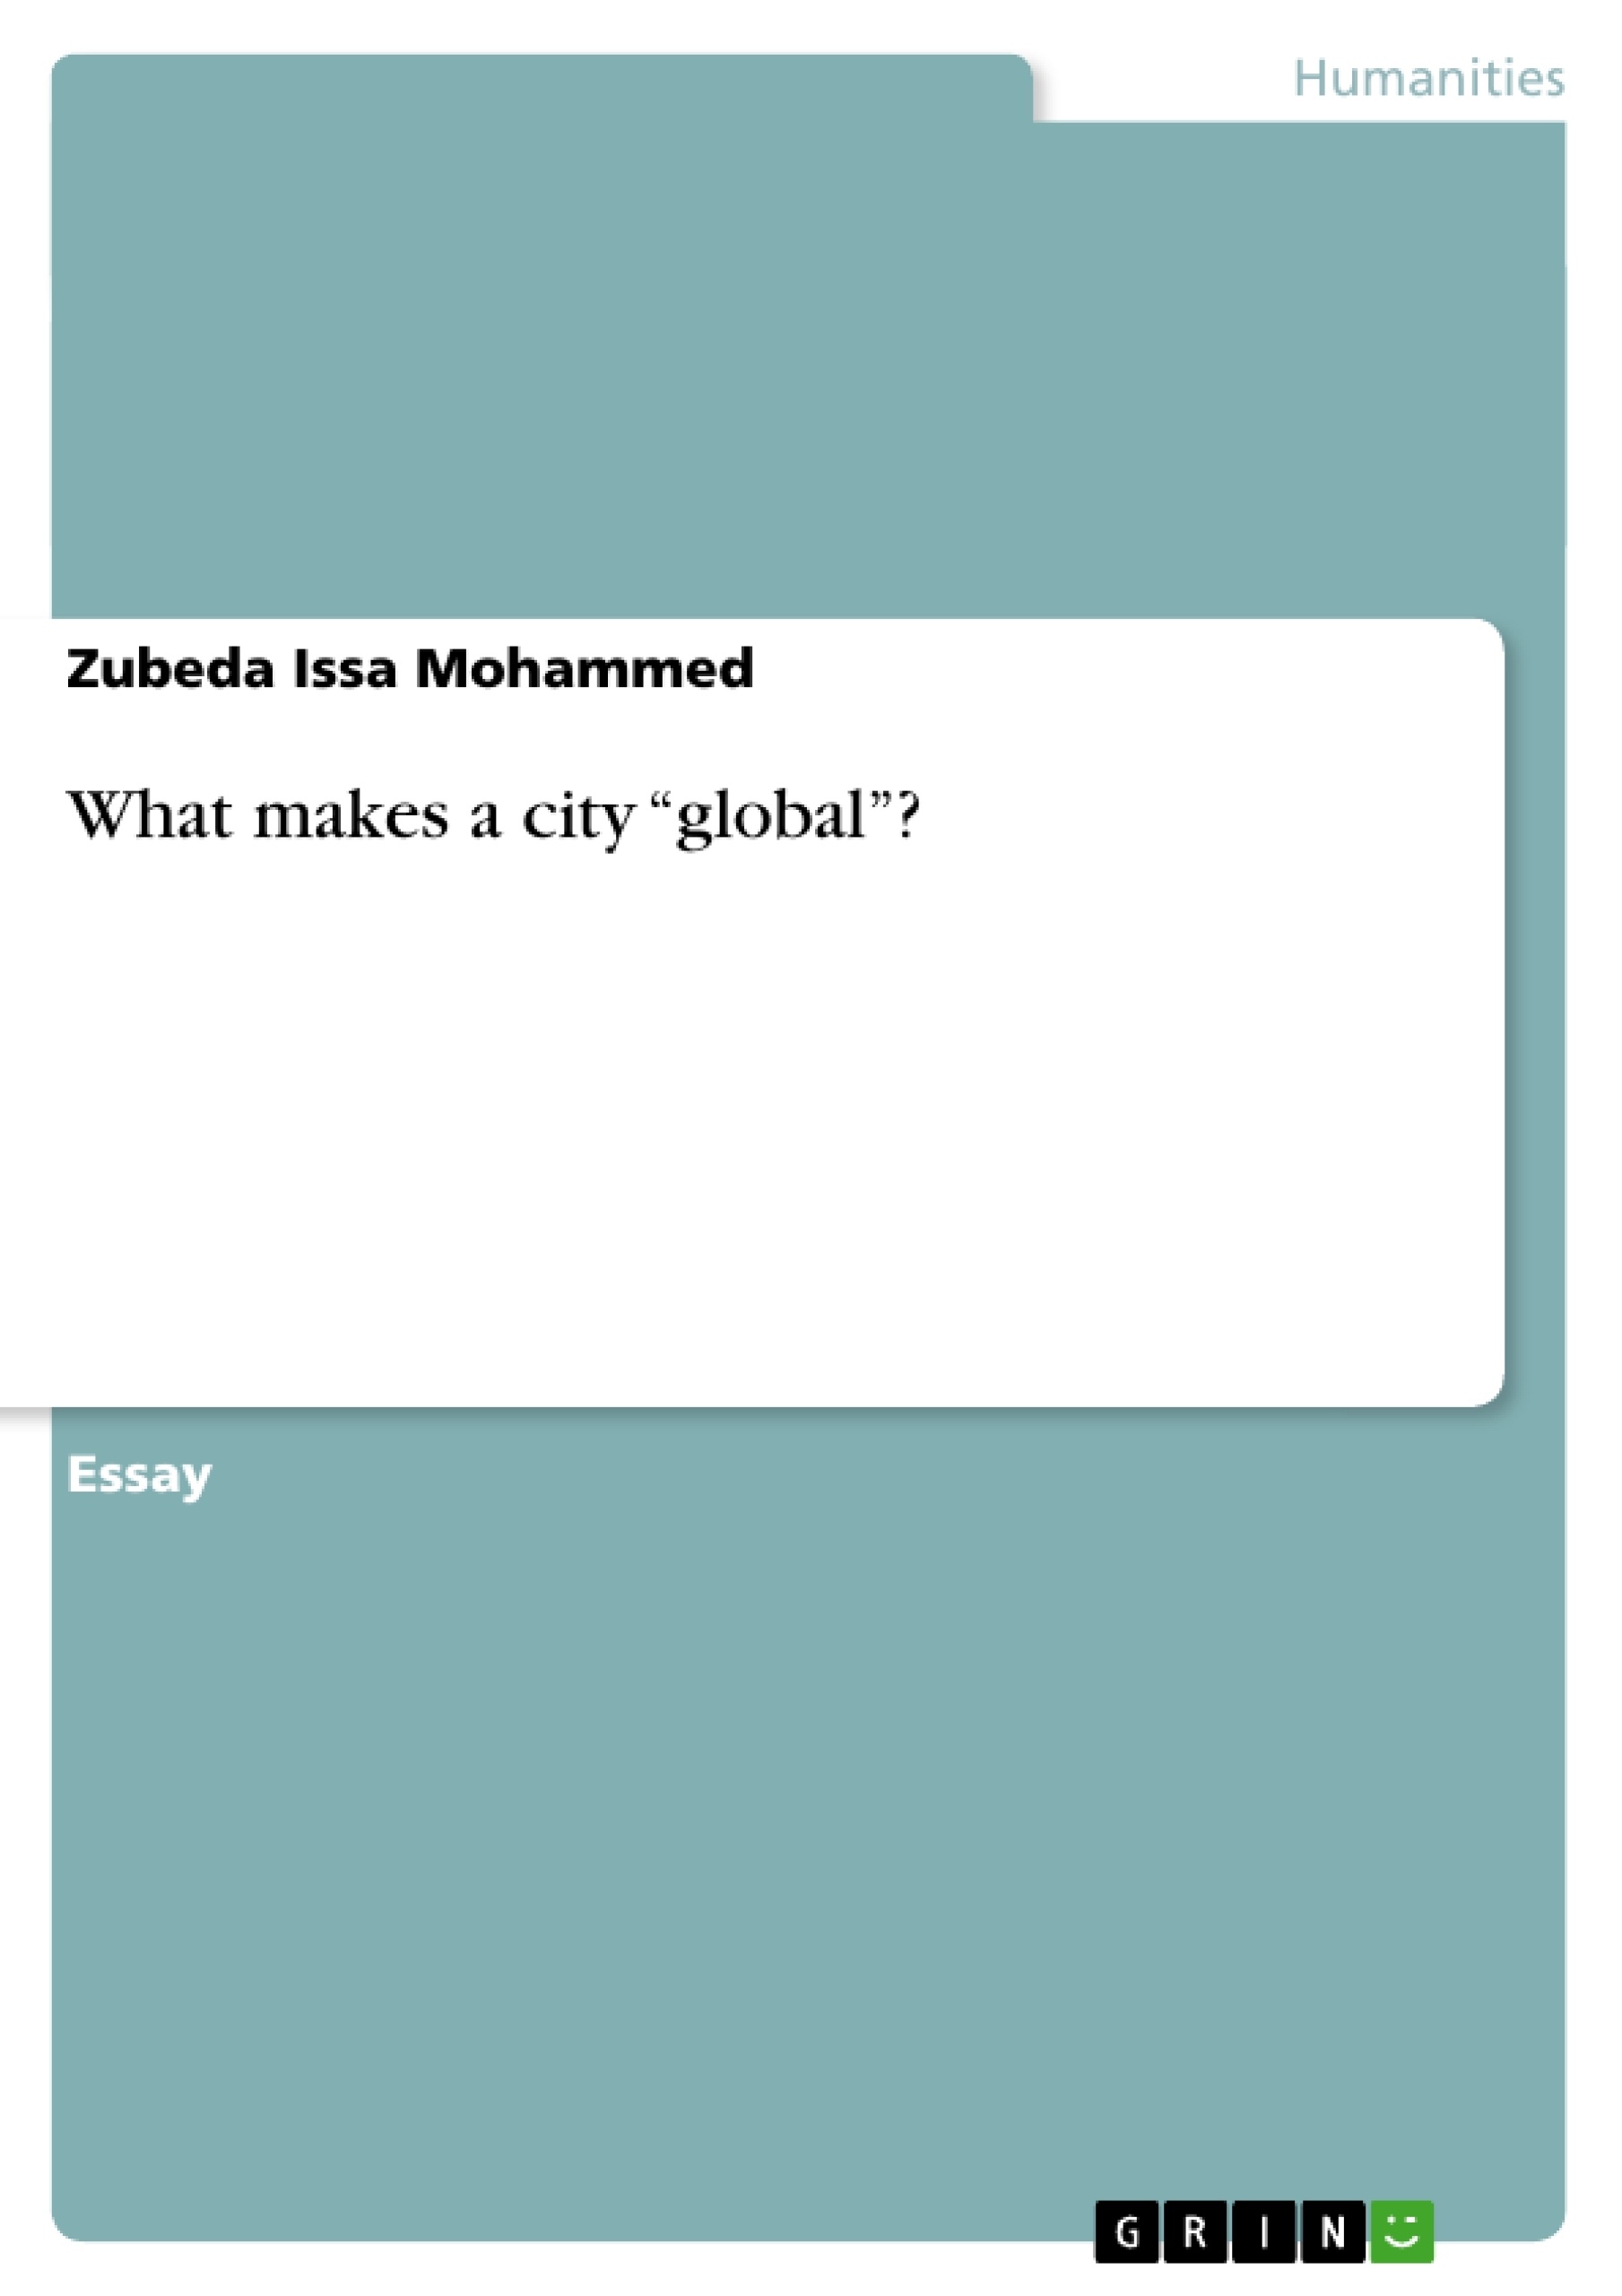 the global city definition